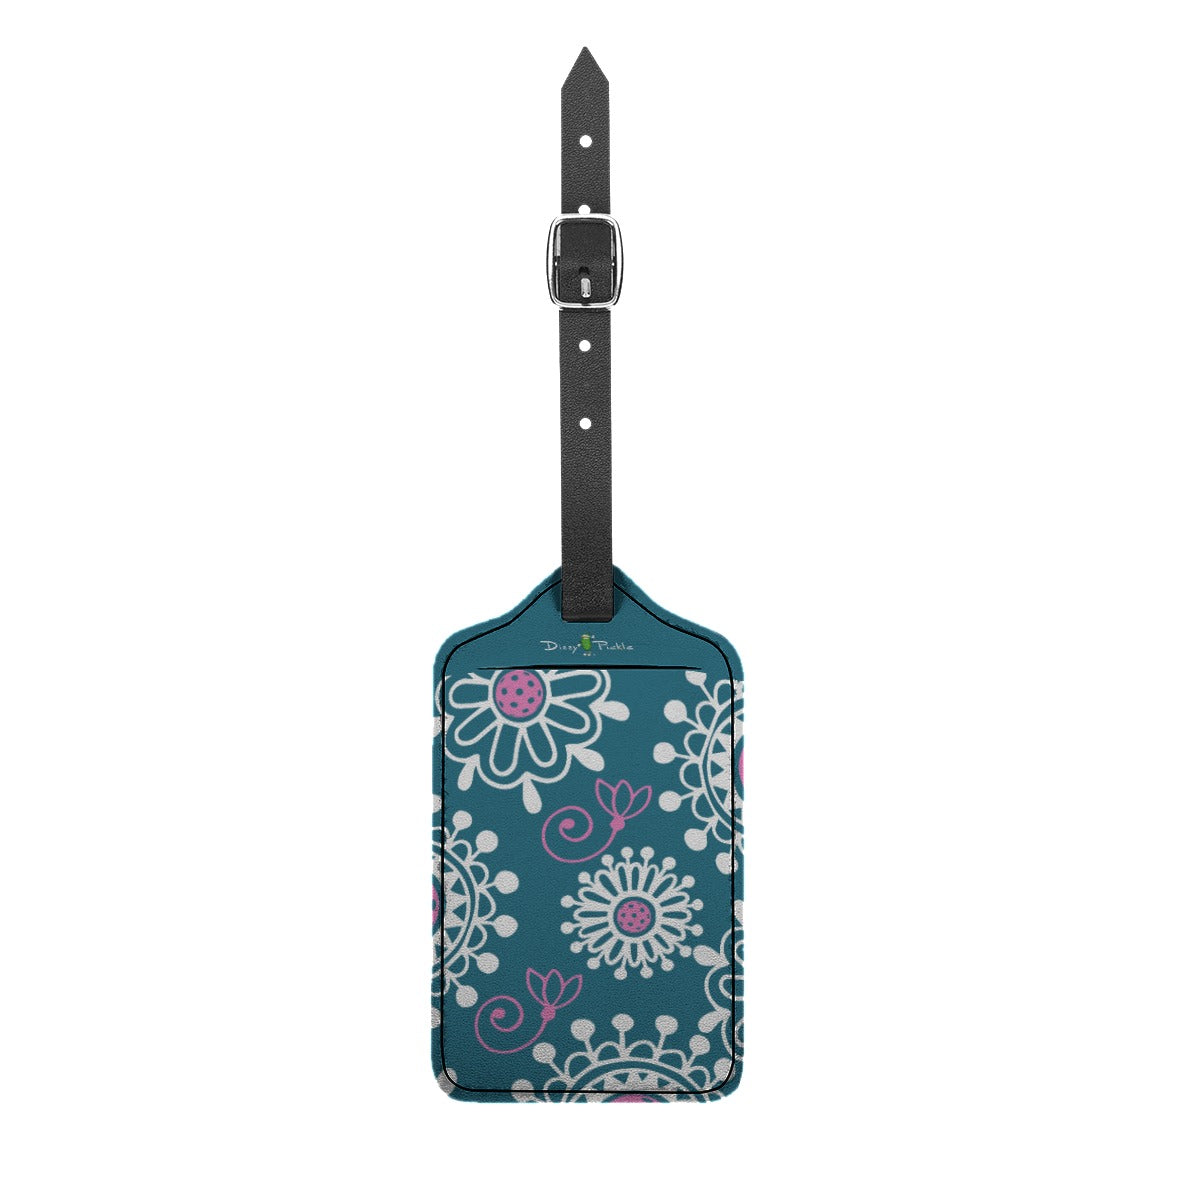 Coming Up Daisies - Teal and Pink - Bag Tag by Dizzy Pickle